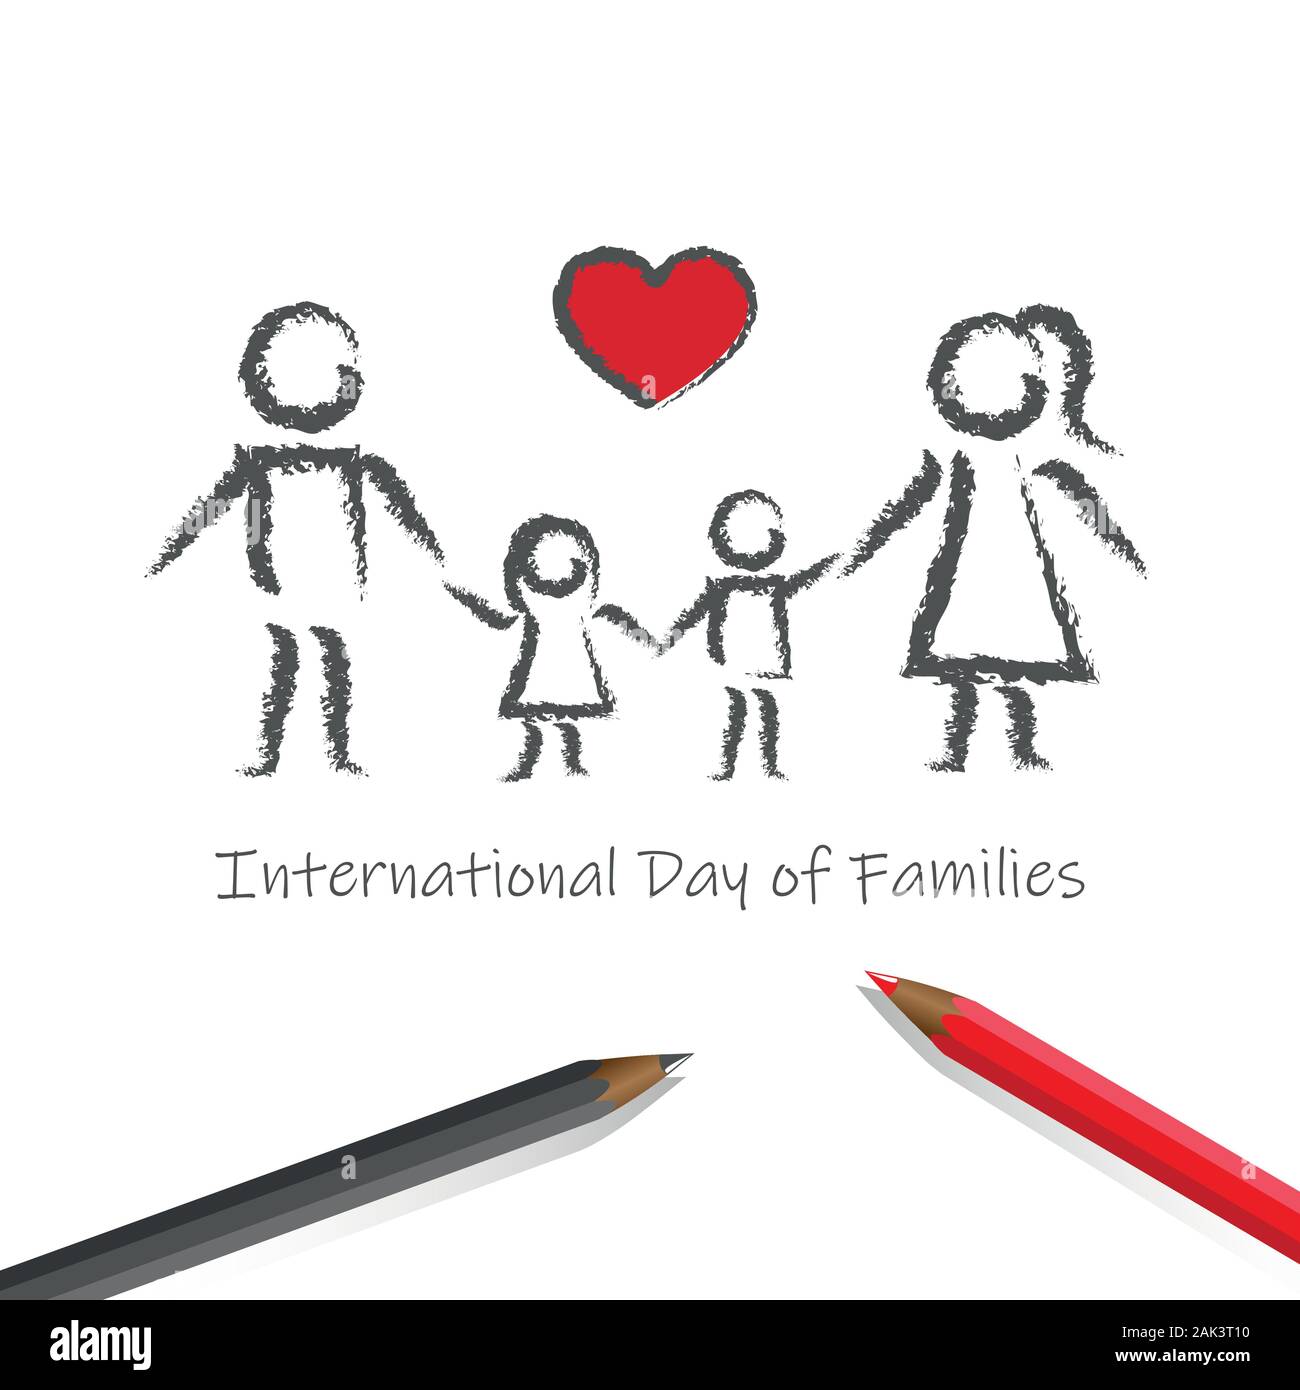 International Family Day Template | PosterMyWall